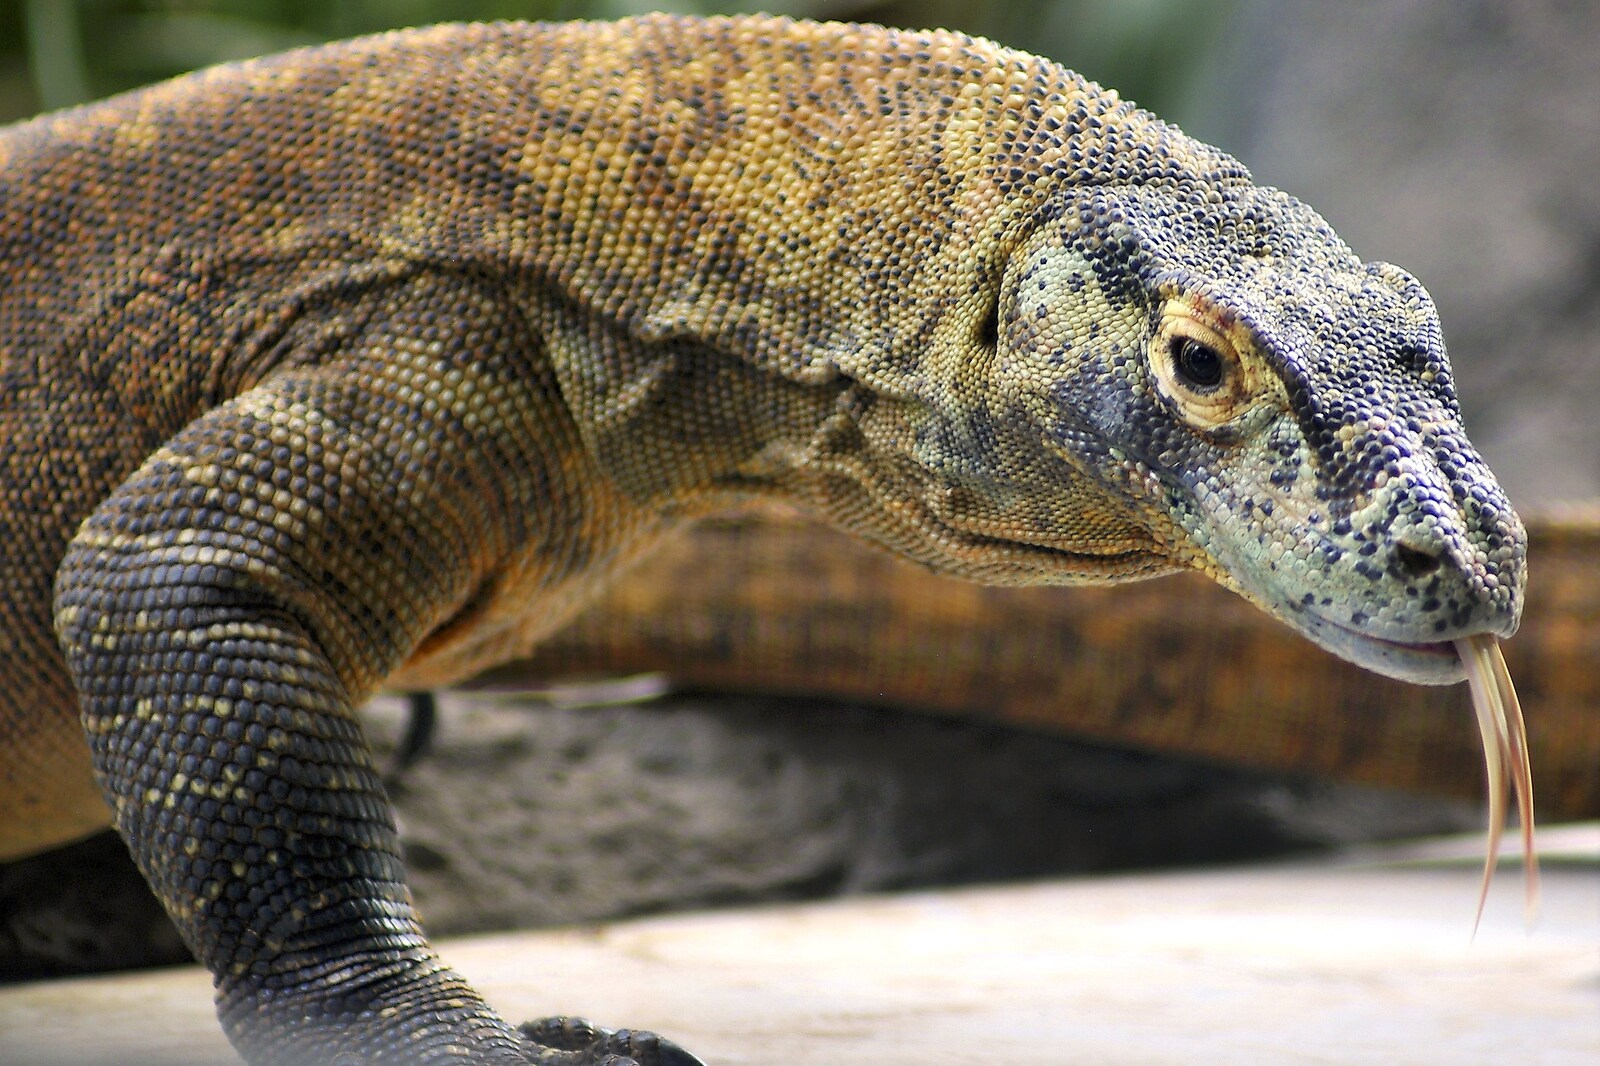 A monitor lizard from San Diego Seven: The Desert and the Dunes, Arizona and California, US - 22nd April